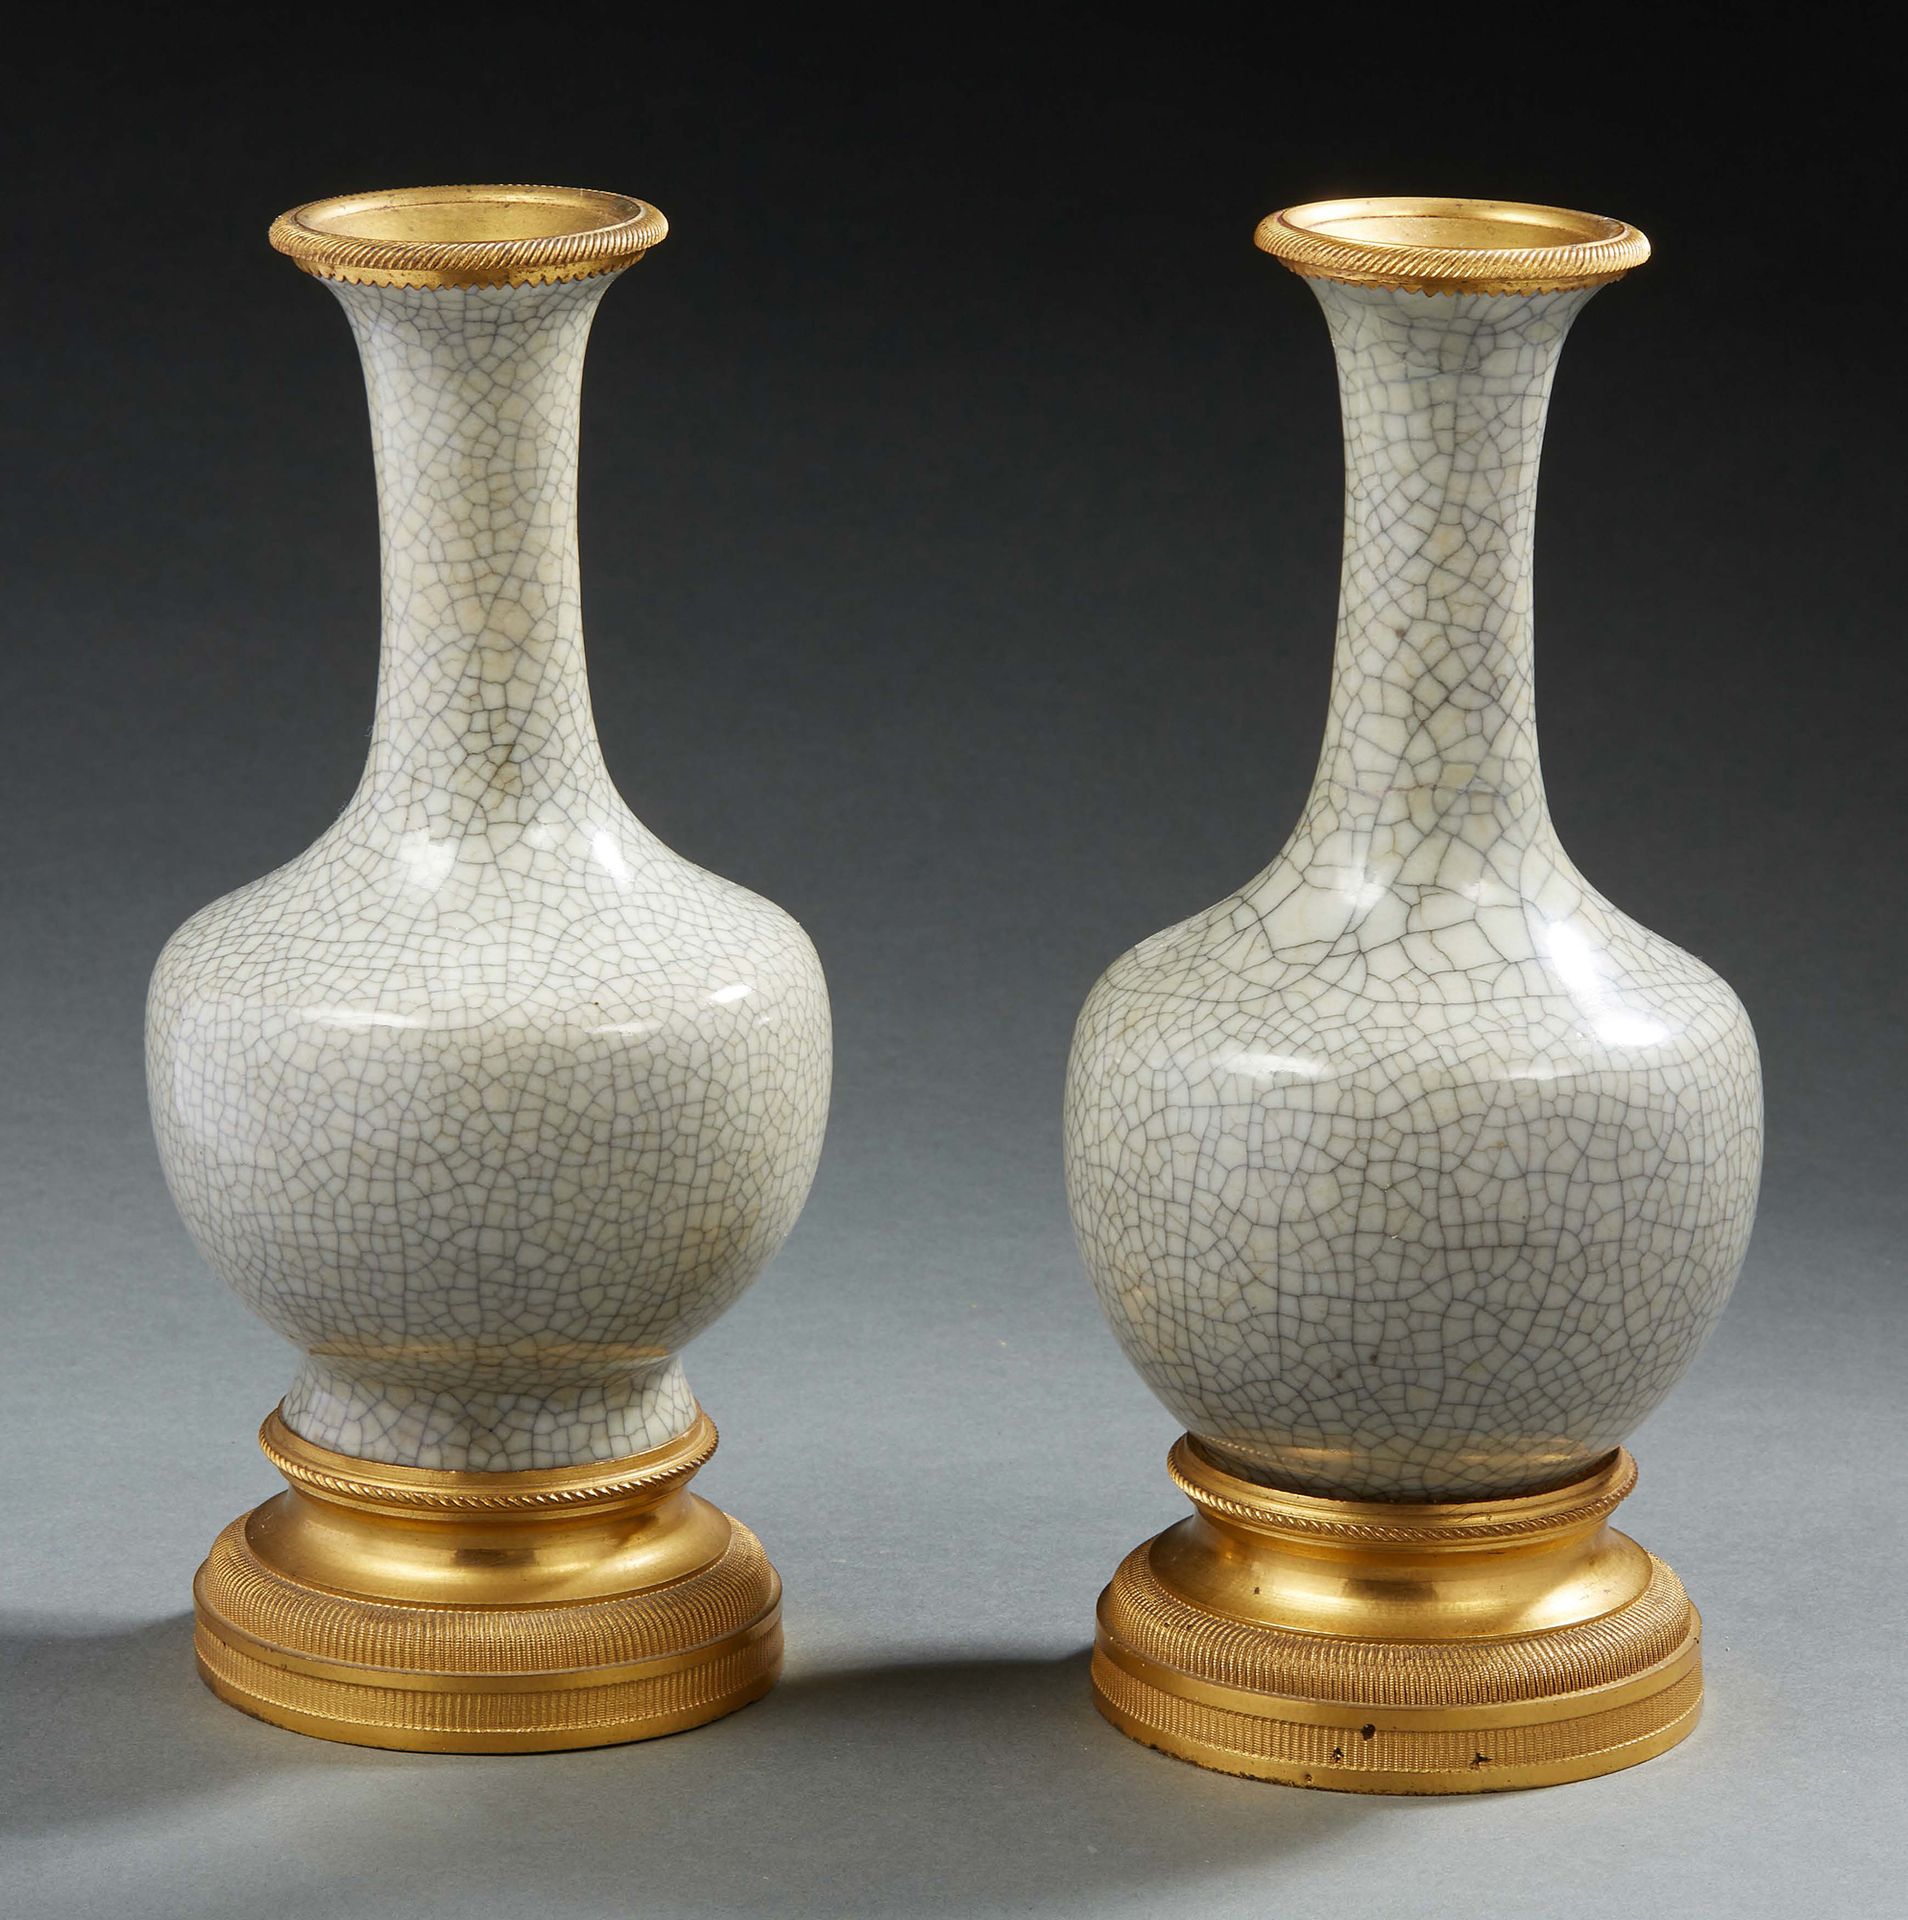 CHINE A pair of long narrow neck cracked porcelain vases of the GE type. Qianlon&hellip;